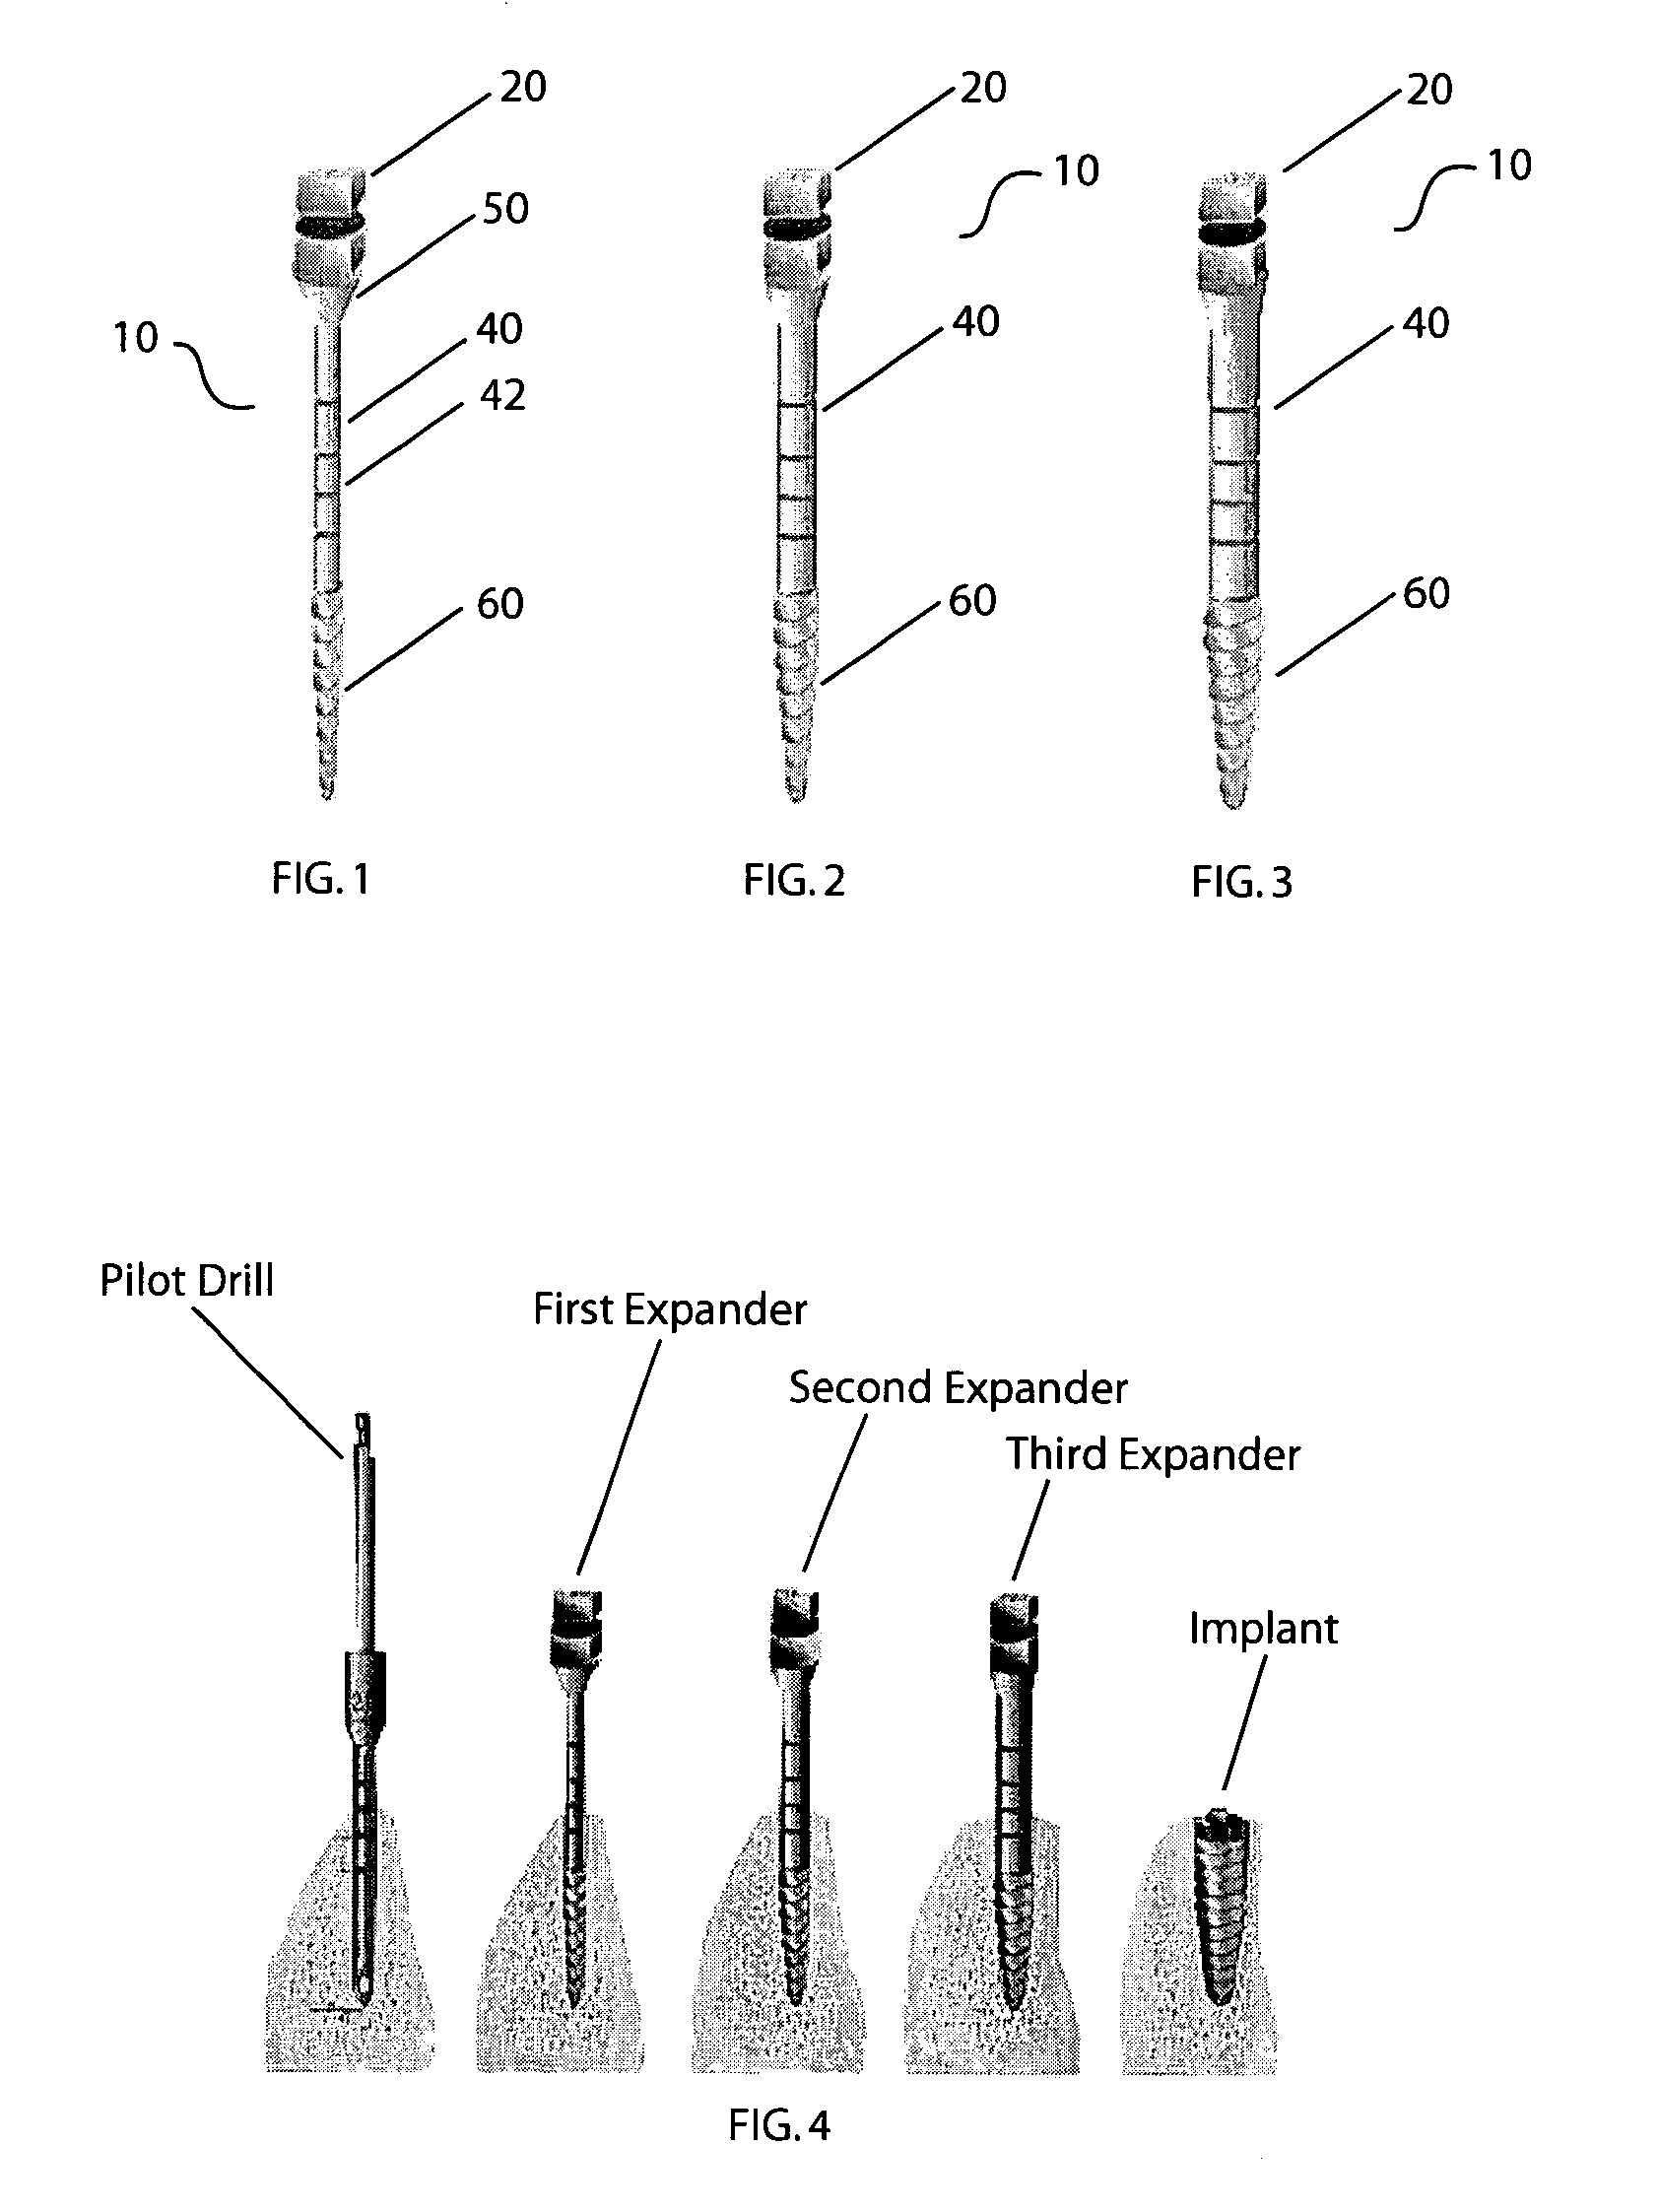 Method of bone expansion and compression for receiving a dental implant using threaded expanders